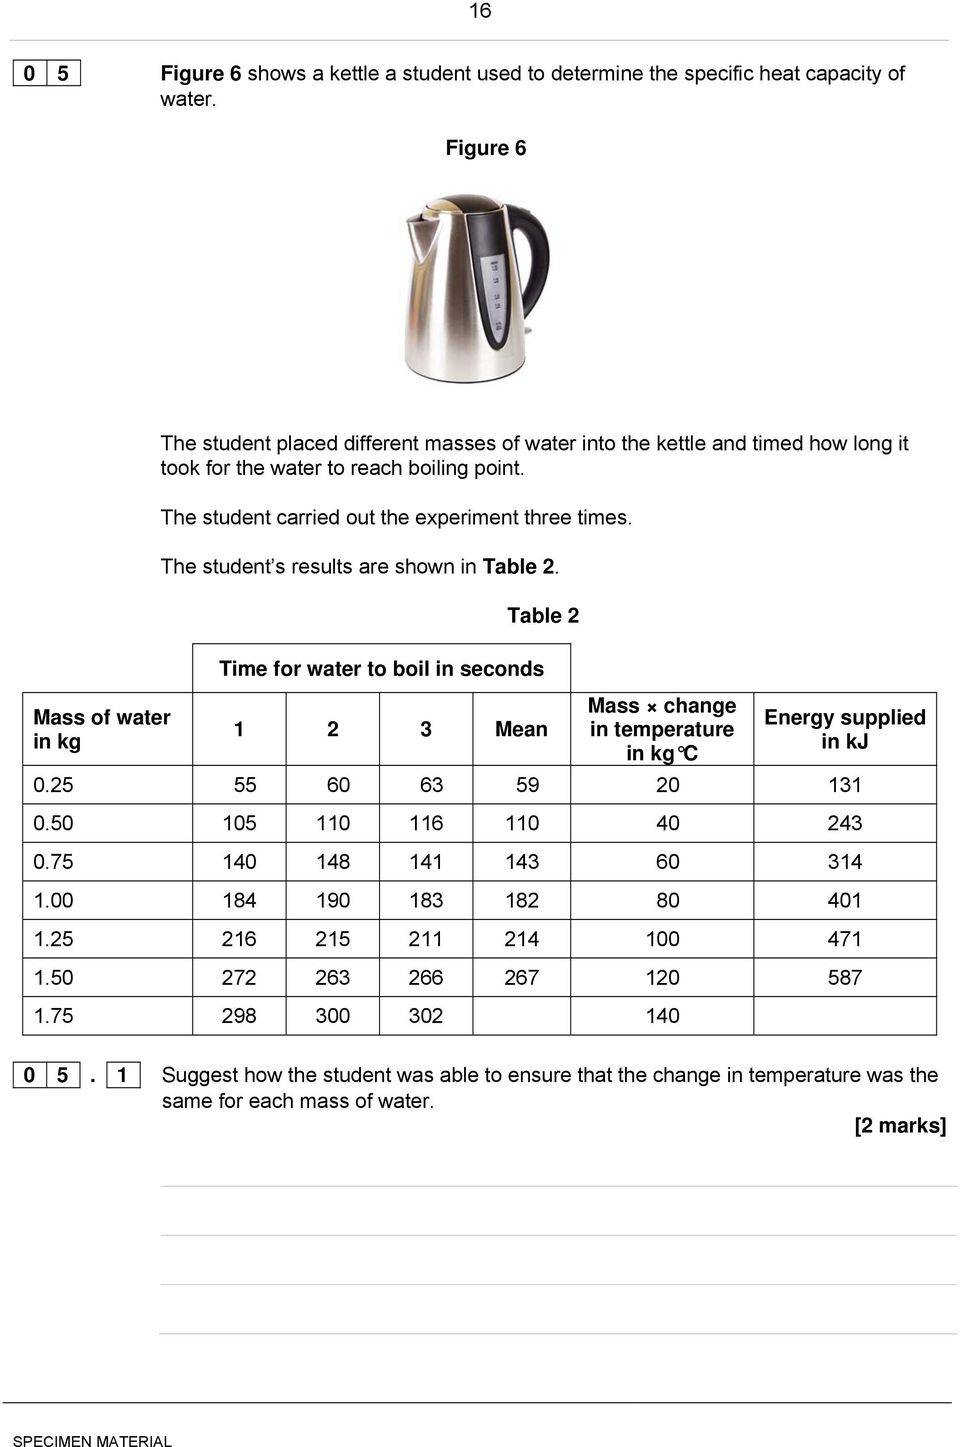 The student carried out the experiment three times. The student s results are shown in Table 2.